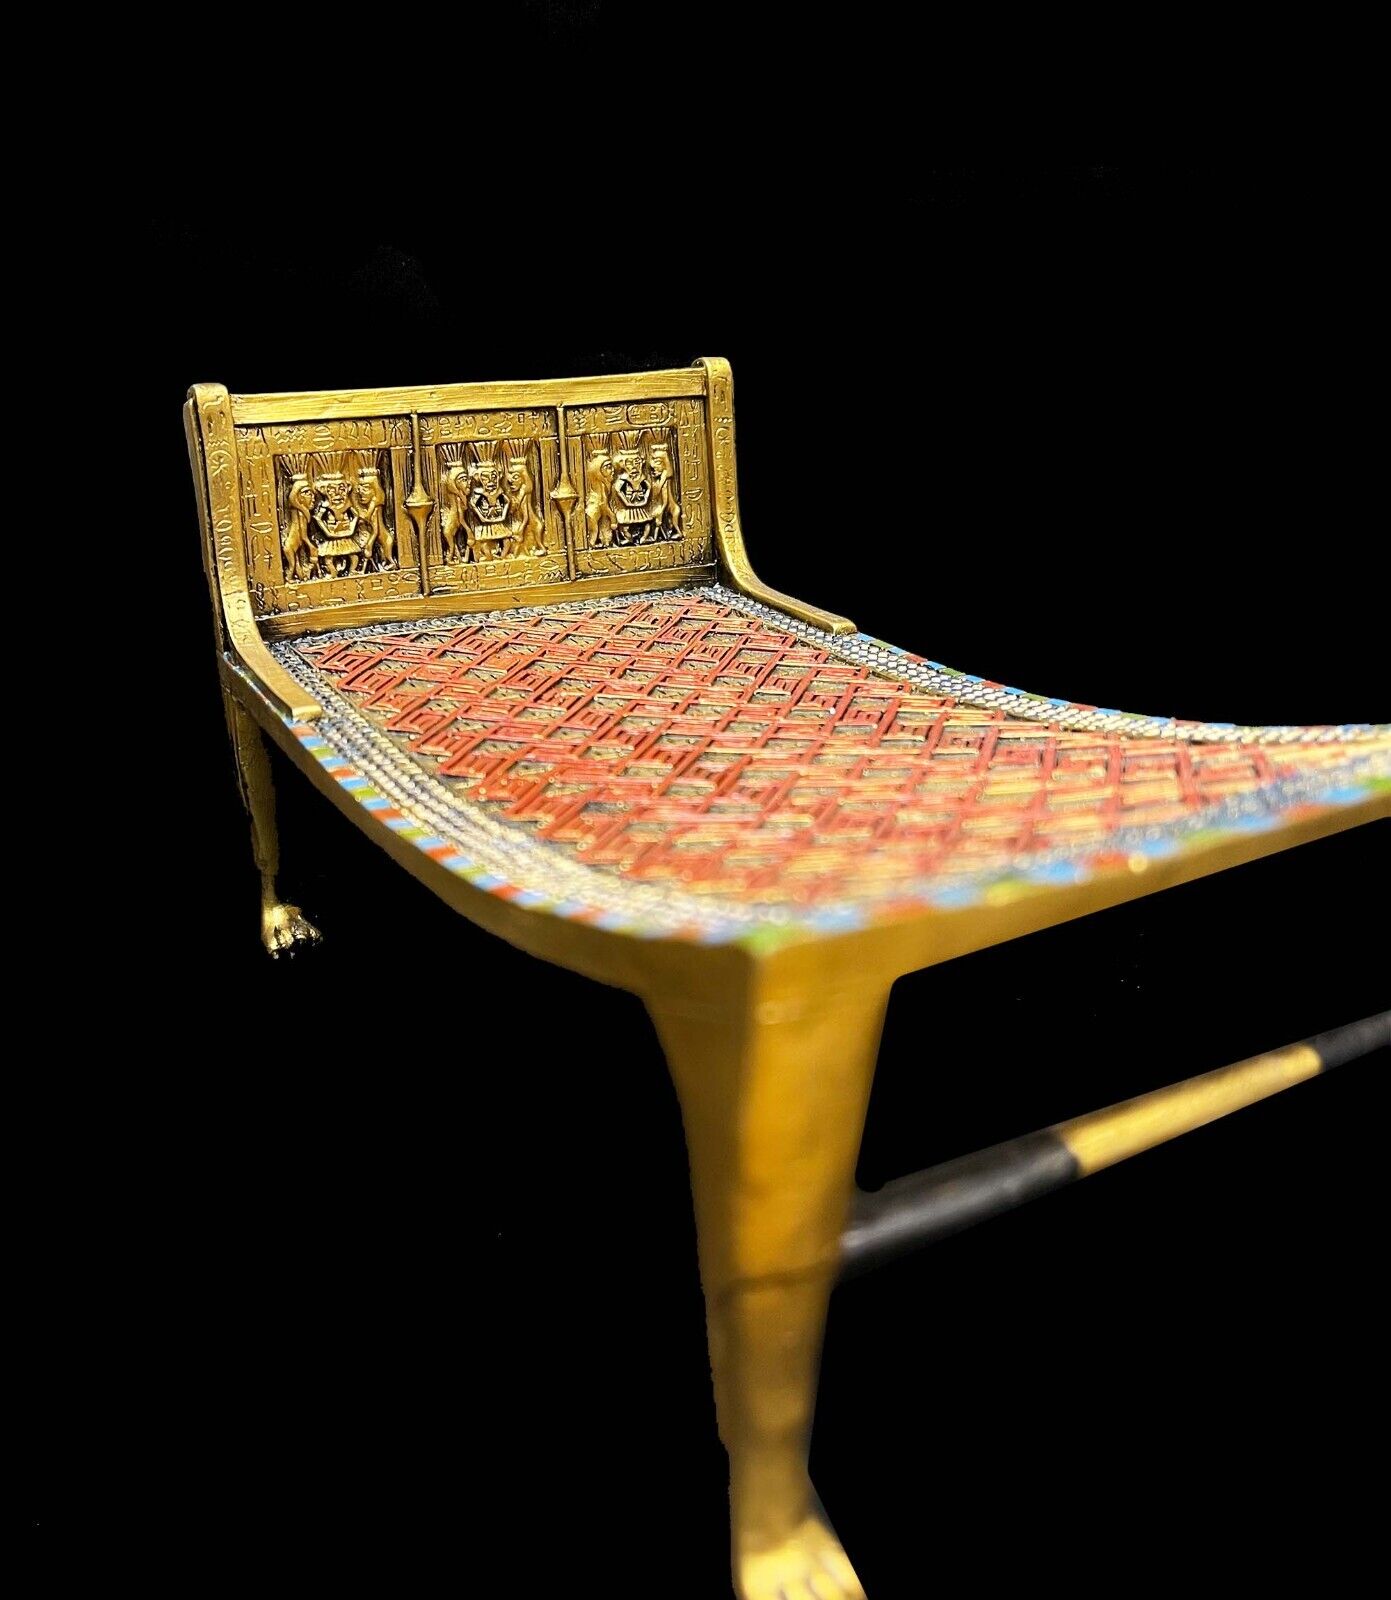 Egyptian King Tutankhamun Bed like the one in the Tomb